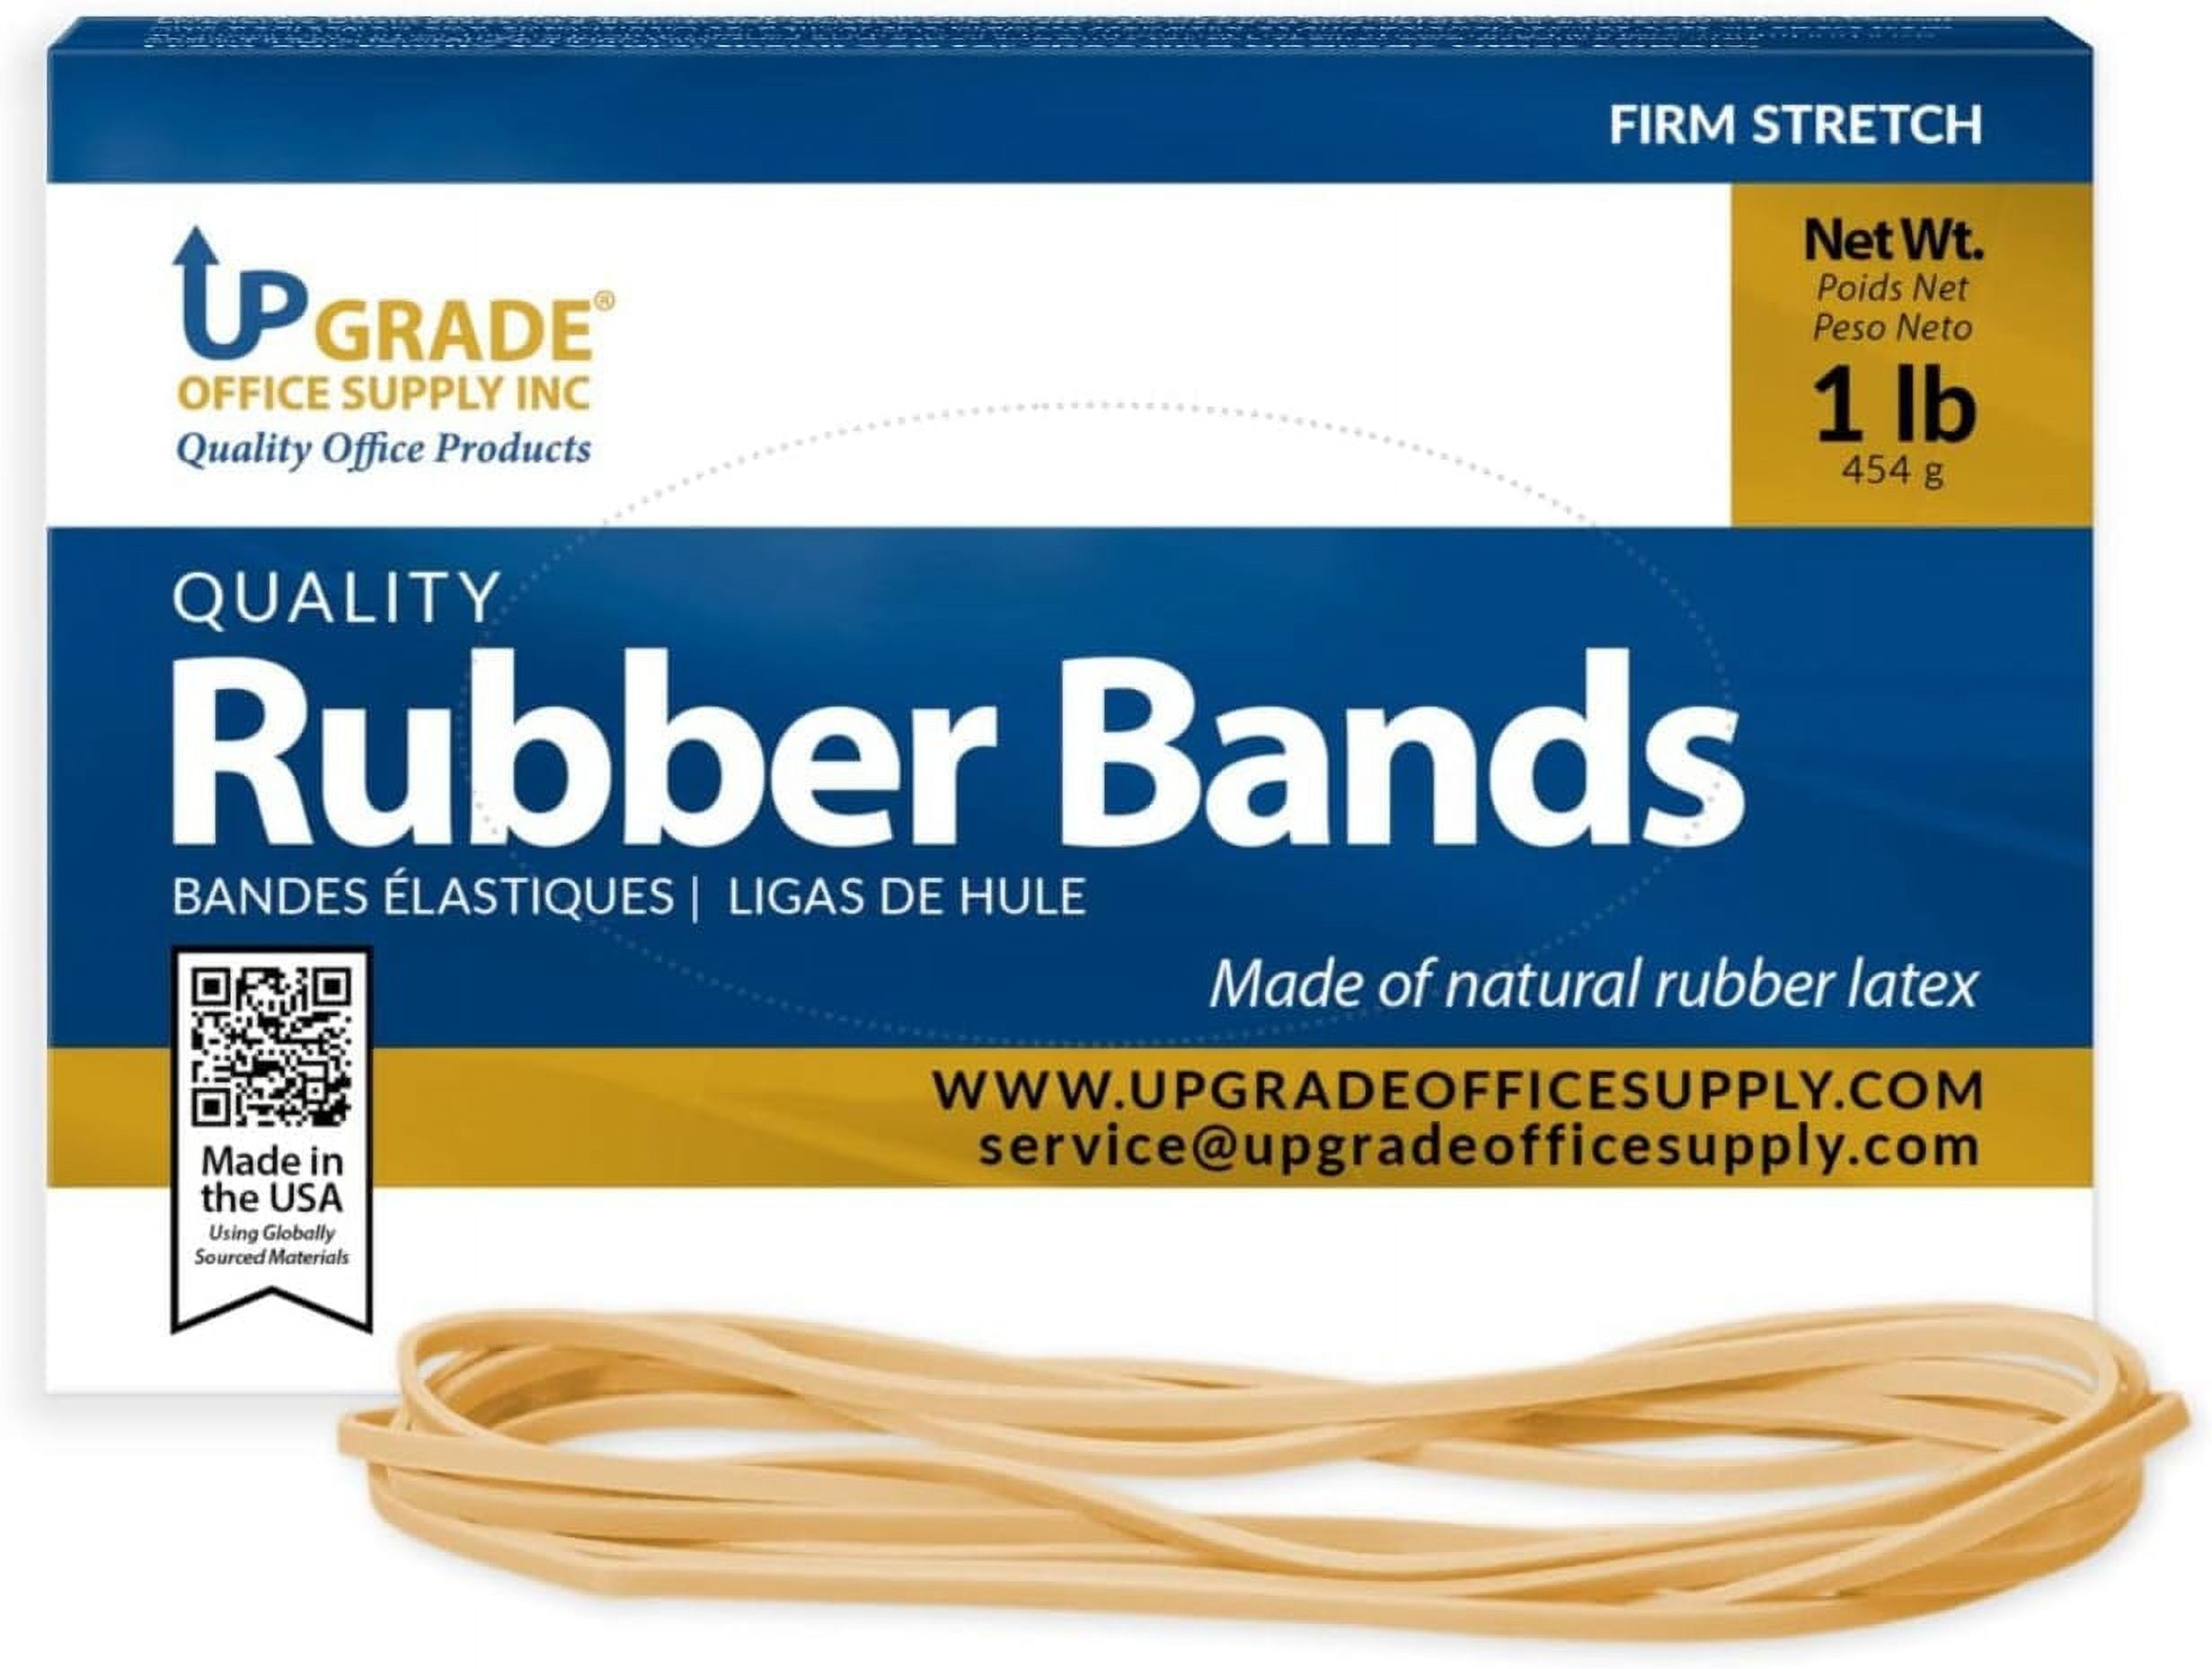 Rubber Band Depot Thick Rubber Bands - 7'' x 5/8'', Size #107,  Approximately 40 Rubber Bands Per Bag, Rubber Band Measurements: 7'' x  5/8'' - 1 Pound Bag 